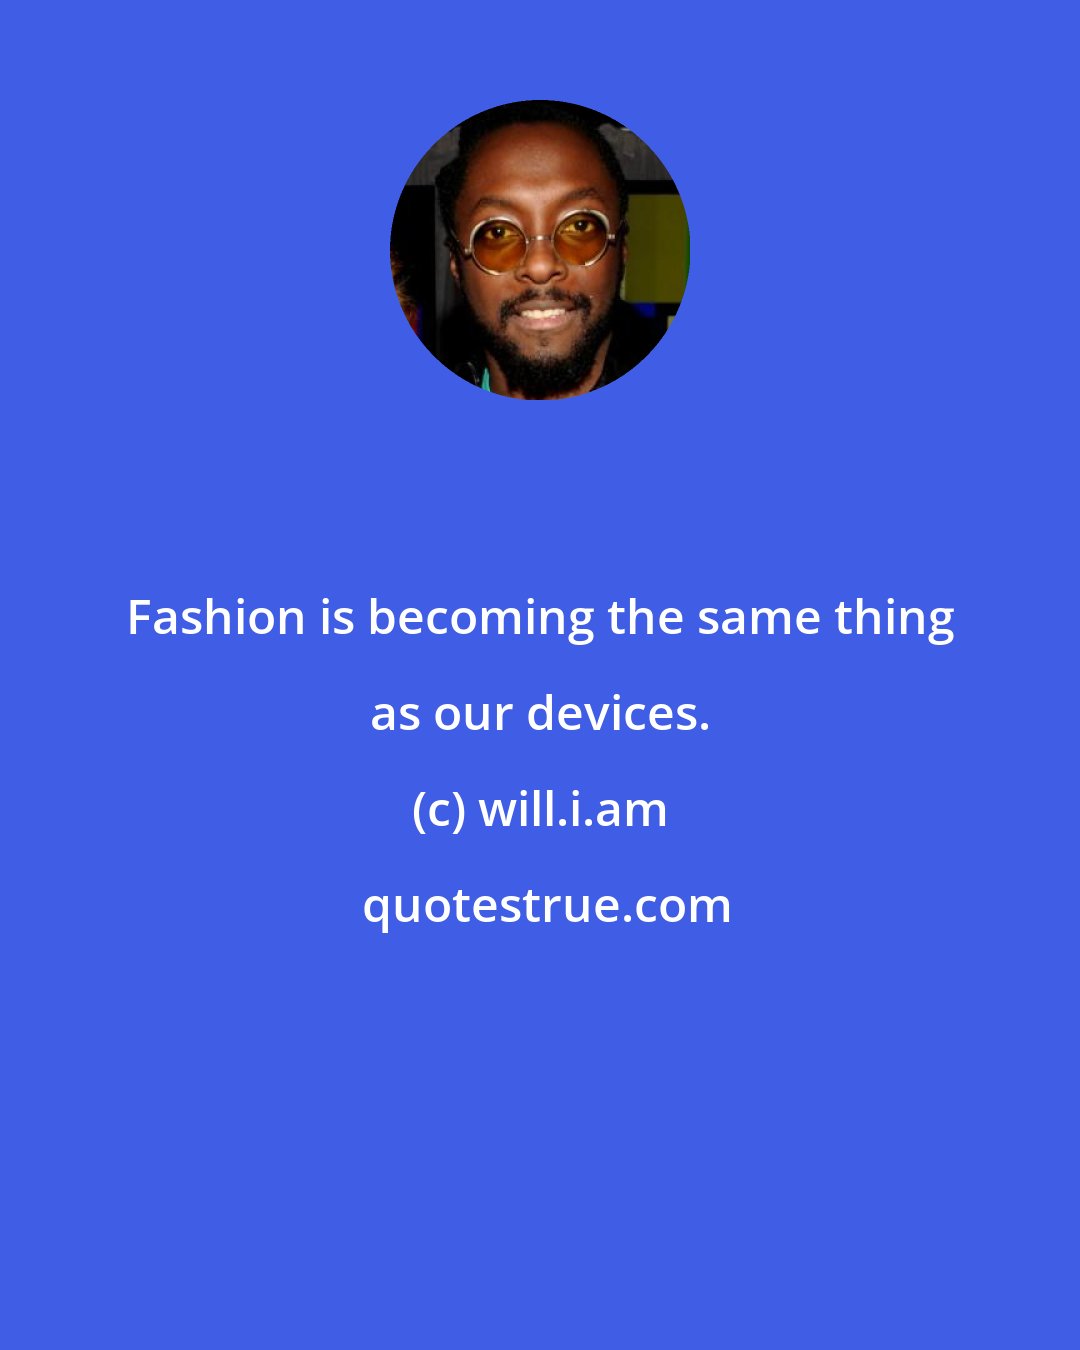 will.i.am: Fashion is becoming the same thing as our devices.